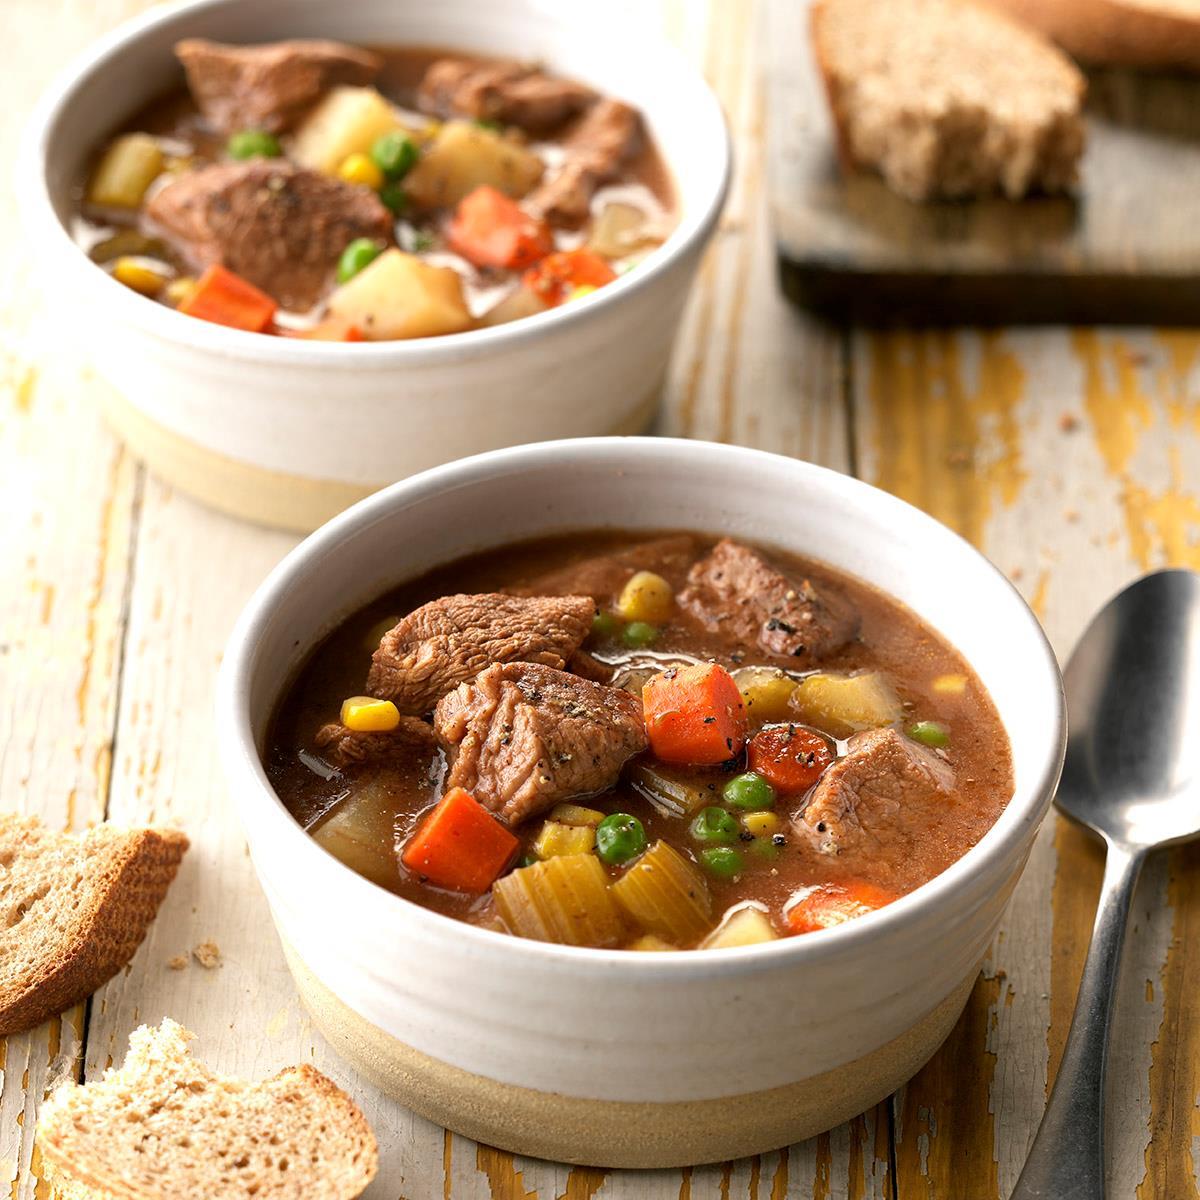 Stephanie's Slow-Cooker Stew Recipe: How to Make It